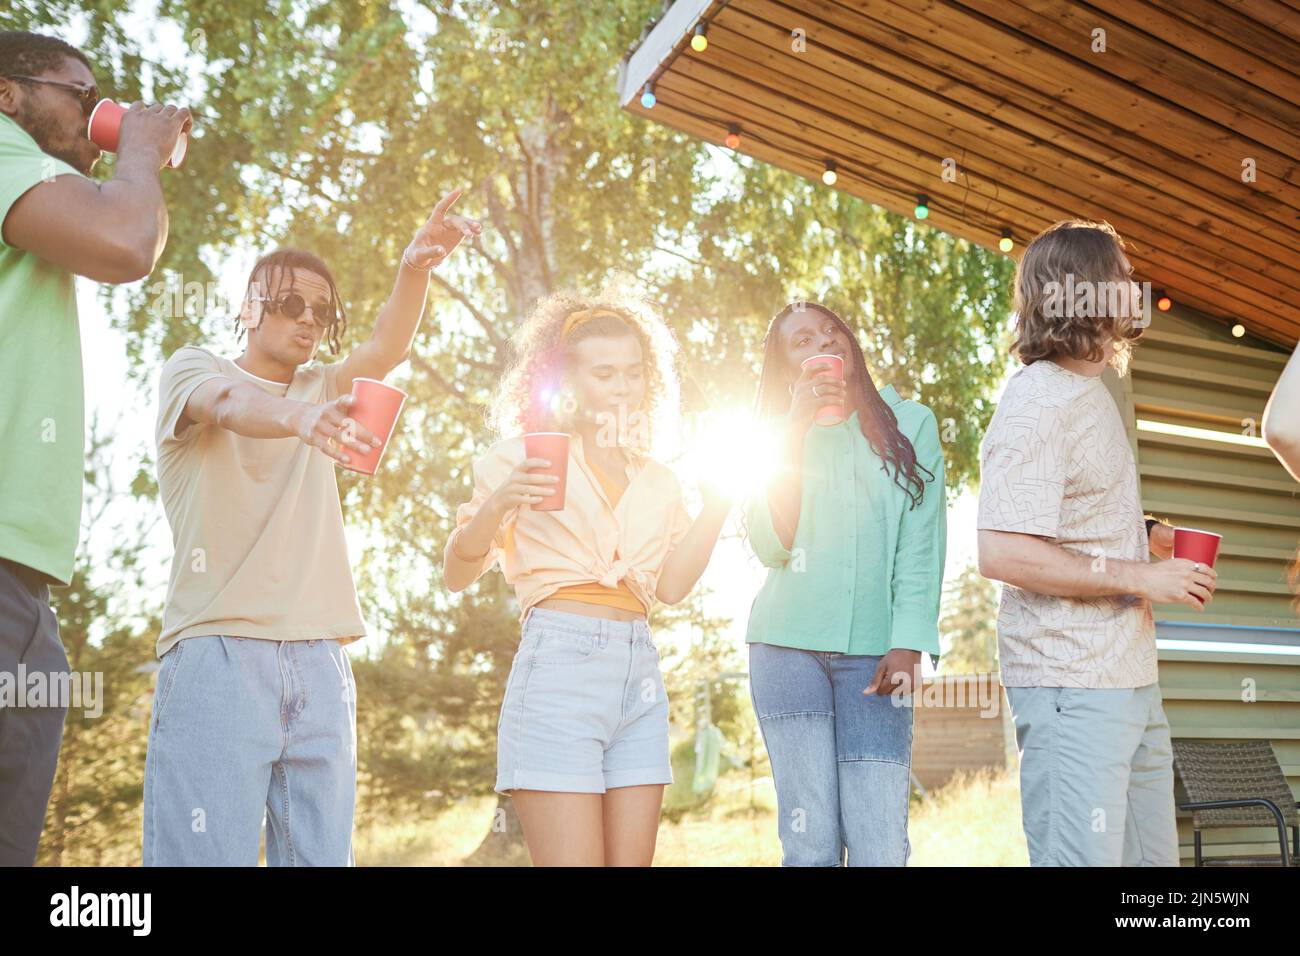 Vibrant shot of diverse group of young people dancing outdoors during Summer party with lens flare Stock Photo